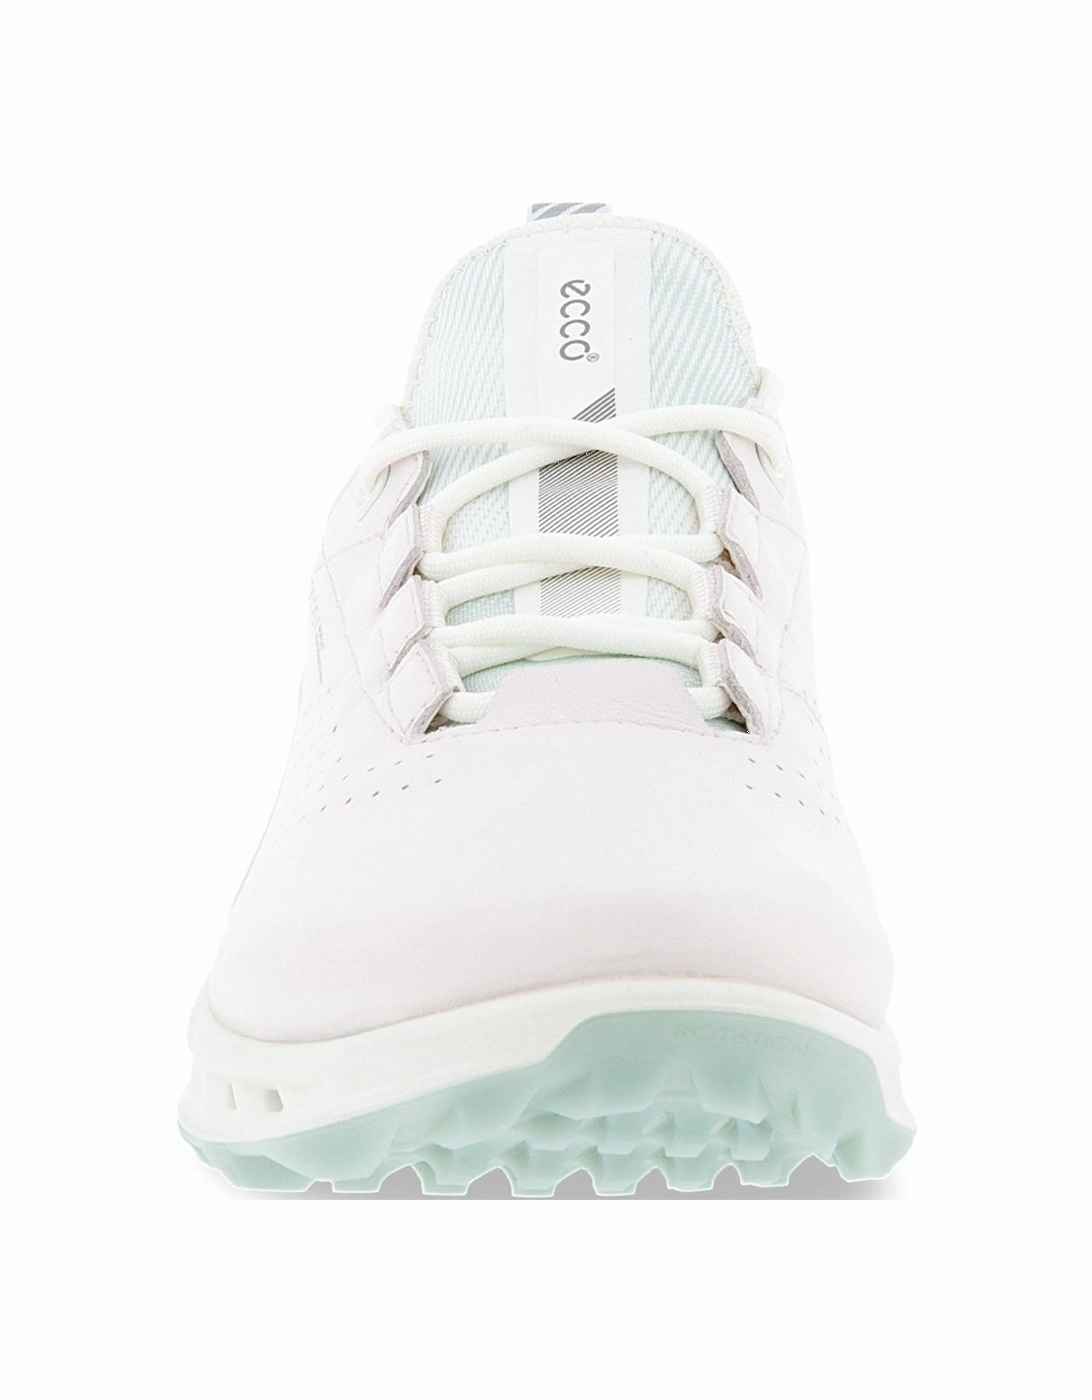 Womens Biom C4 Leather GORE-TEX Golf Shoes